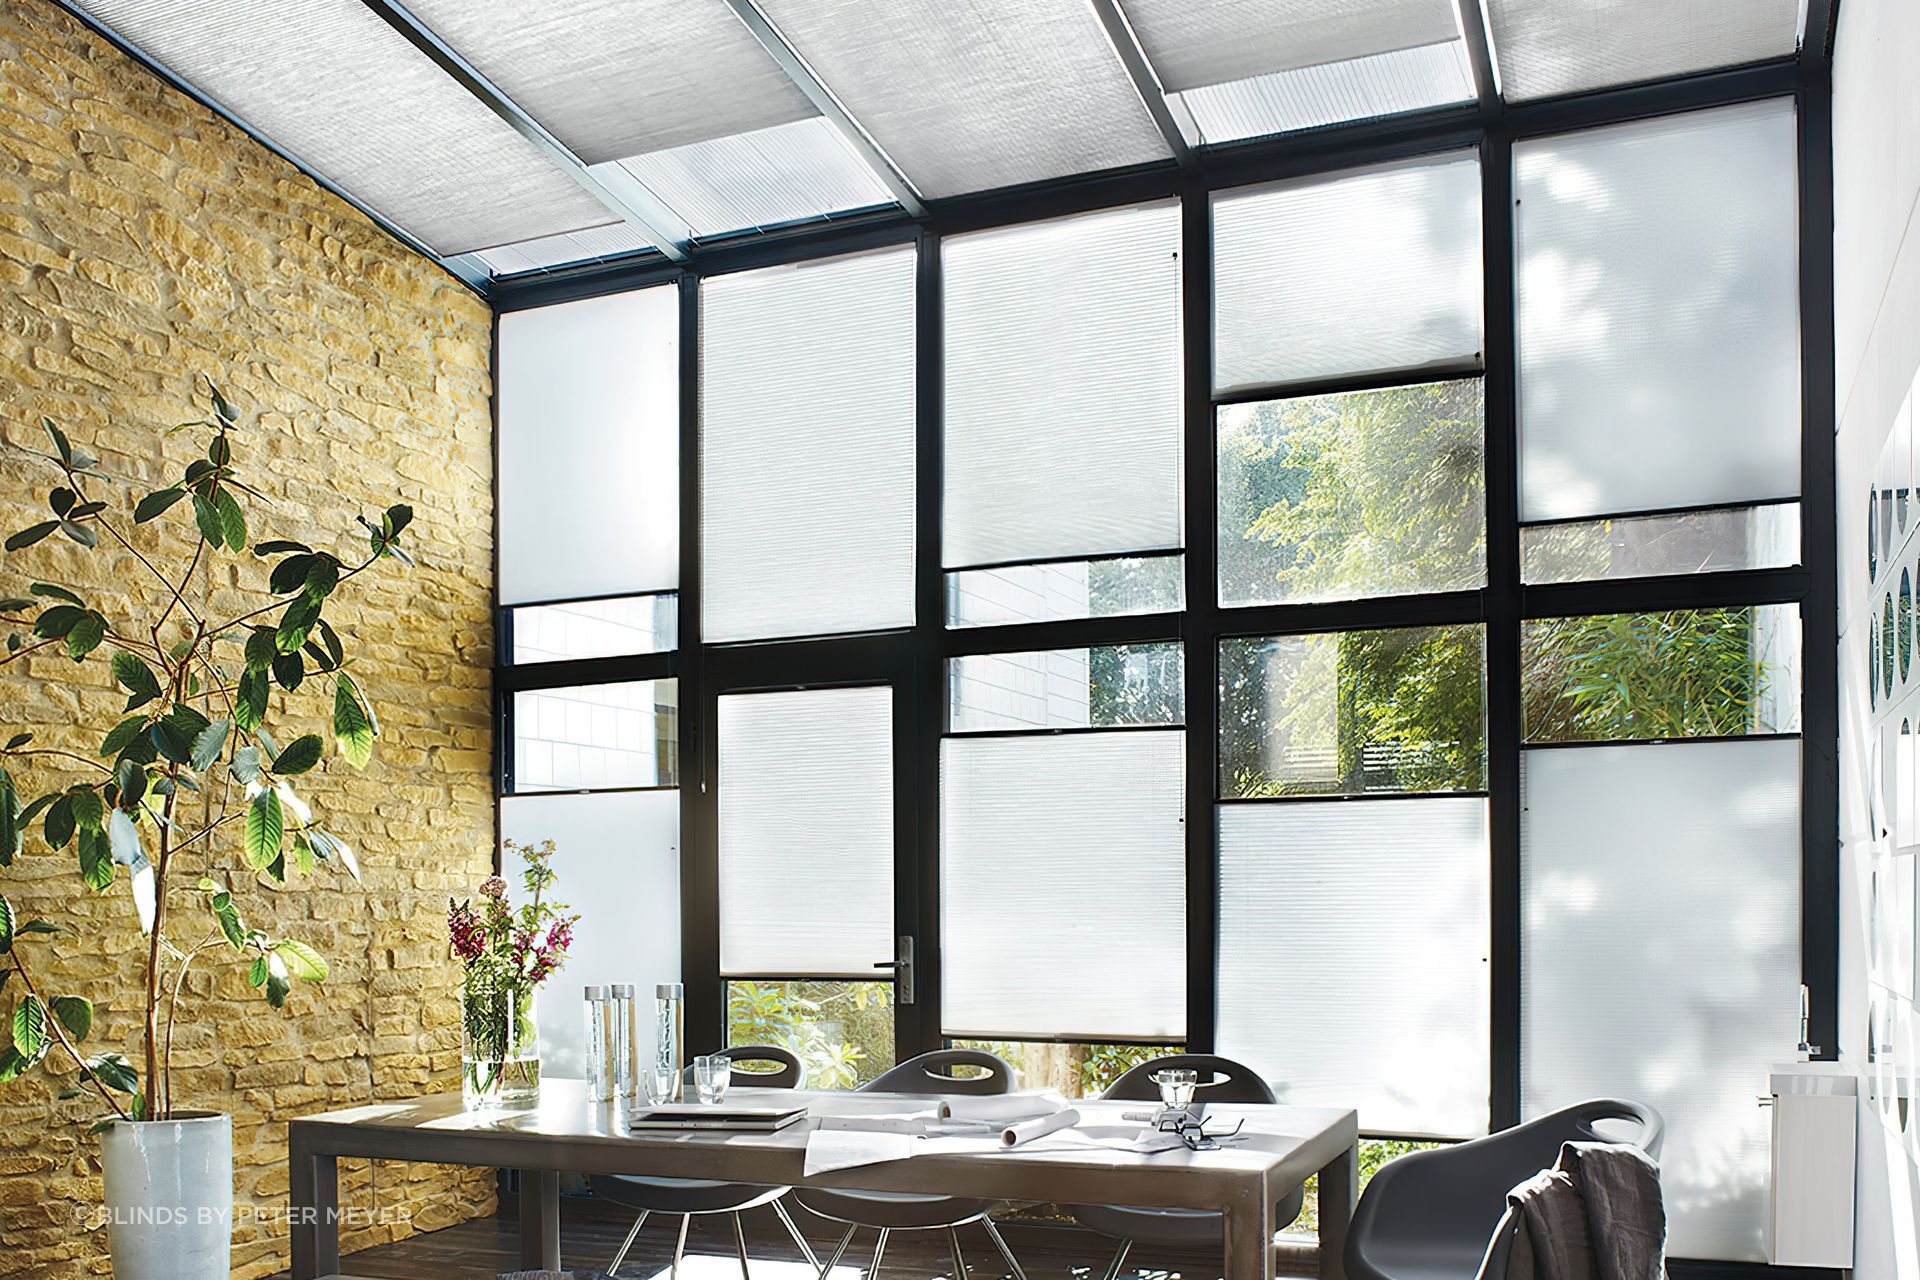 Honeycomb blinds can be operated by cord and cordless options for customisable privacy.